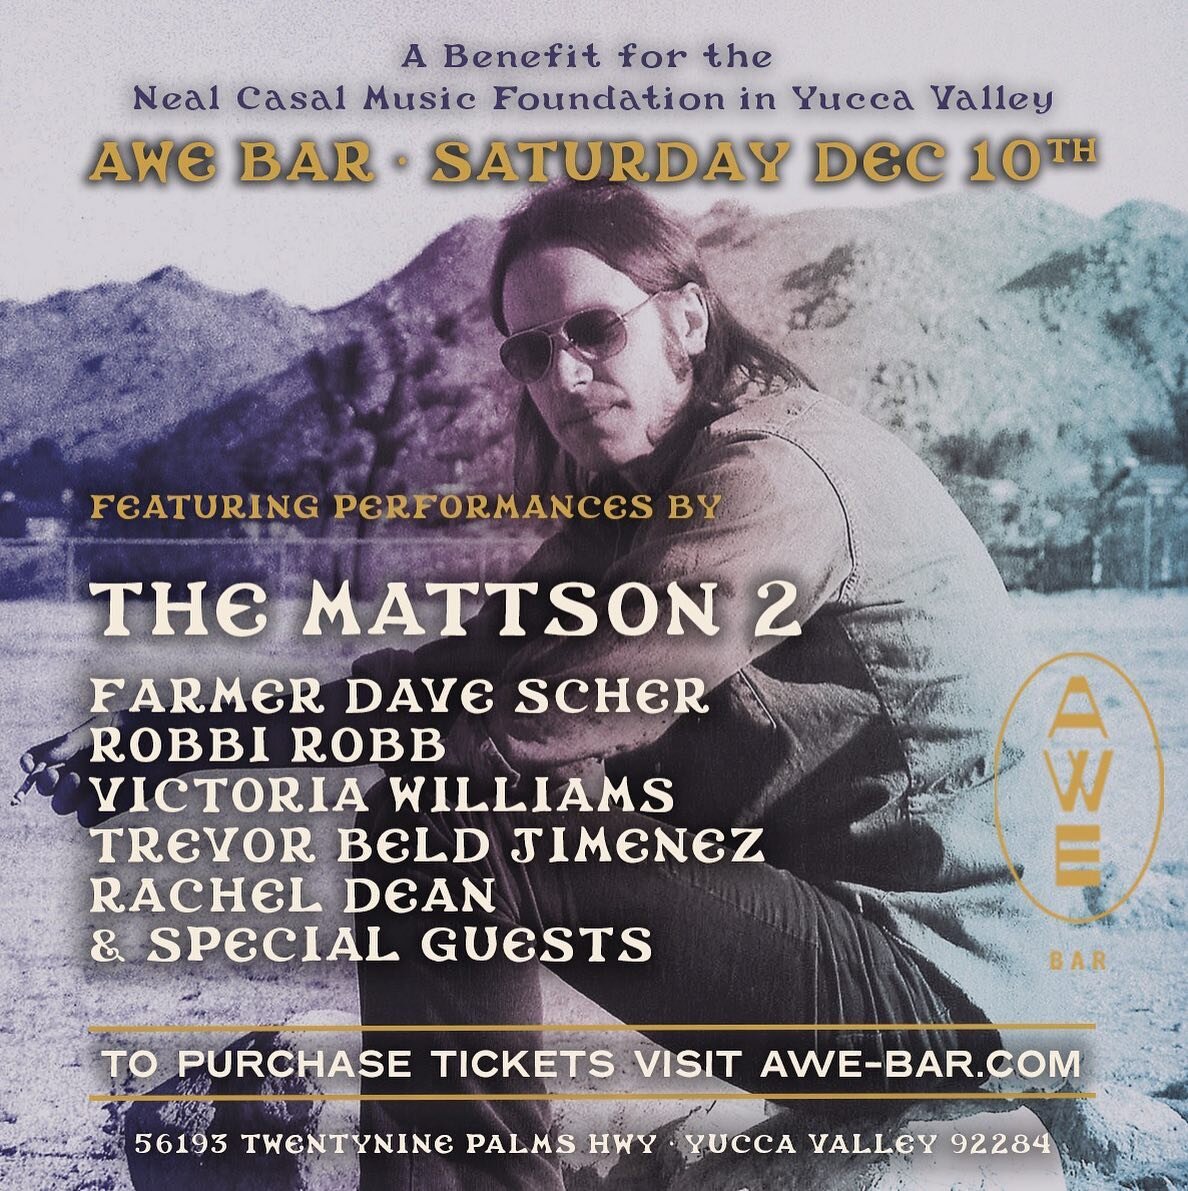 Our friends at the @awe_bar_  are hosting a benefit concert for the NCMF! Join us on Saturday, December 10th, in Yucca Valley for featured performances by some of Neal's favorite friends and musicians: 

The Mattson 2 
Farmer Dave Scher
Robbi Robb
Vi